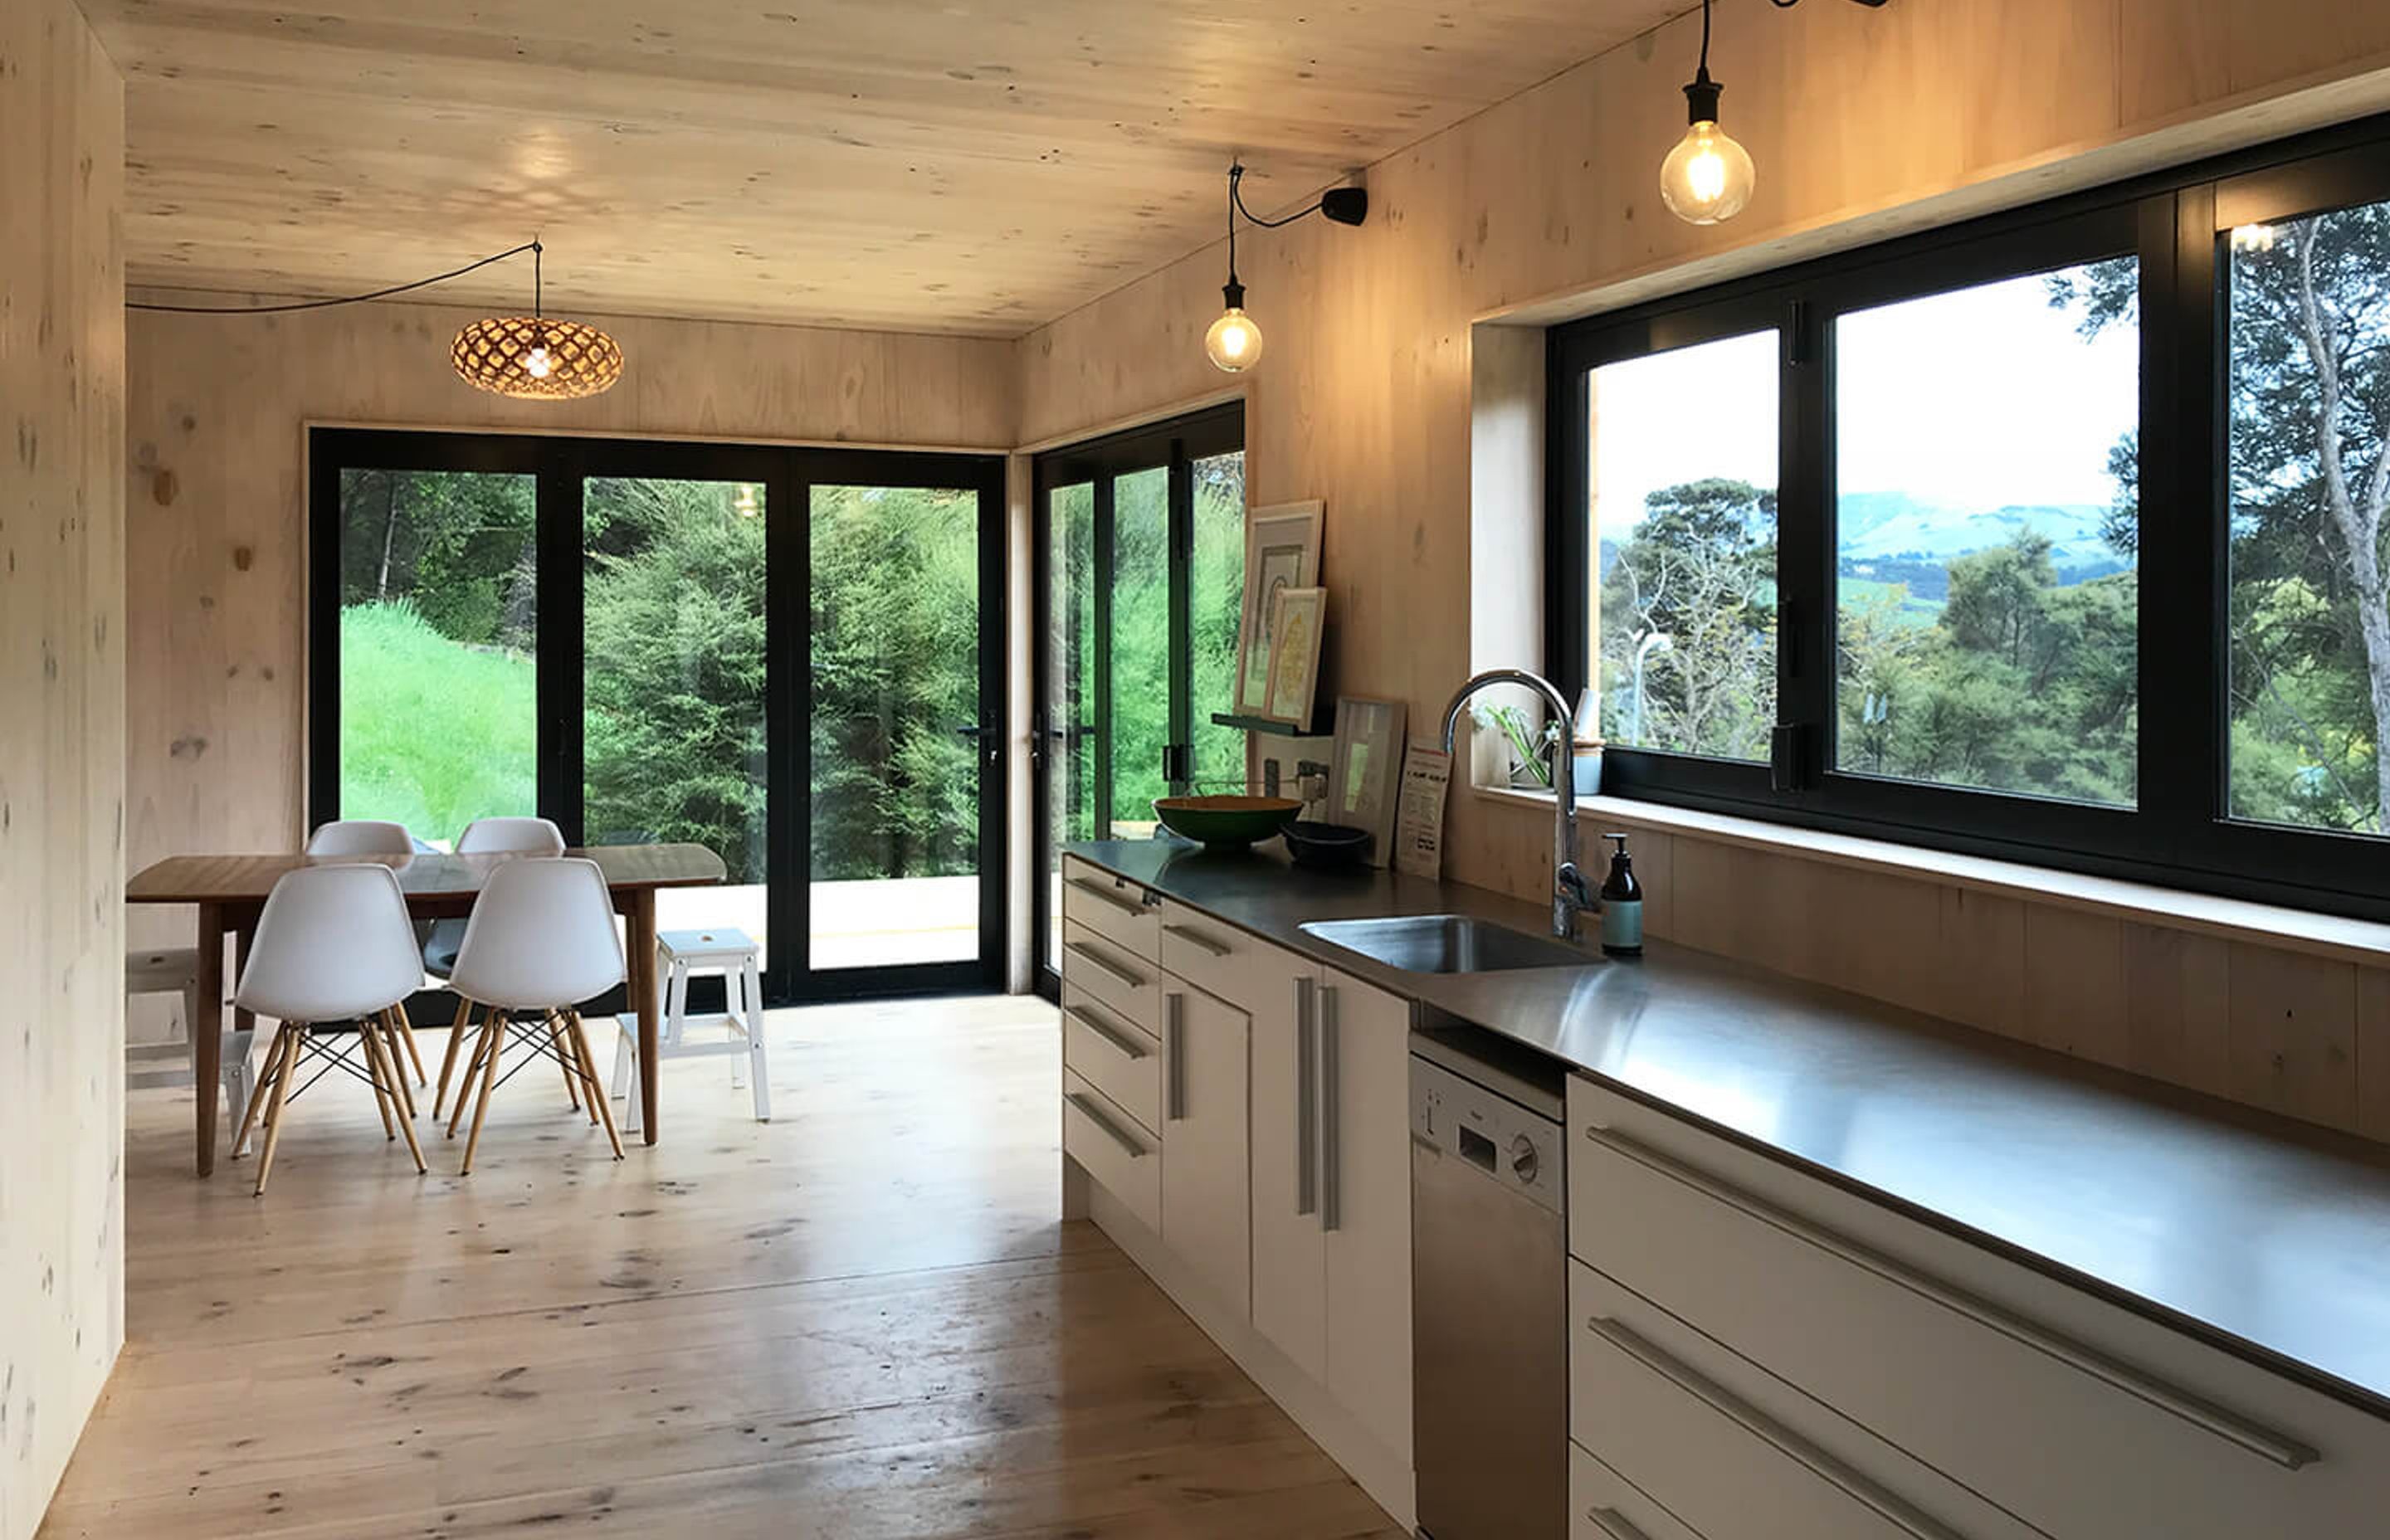 The kitchen and dining space looks out over the valley.